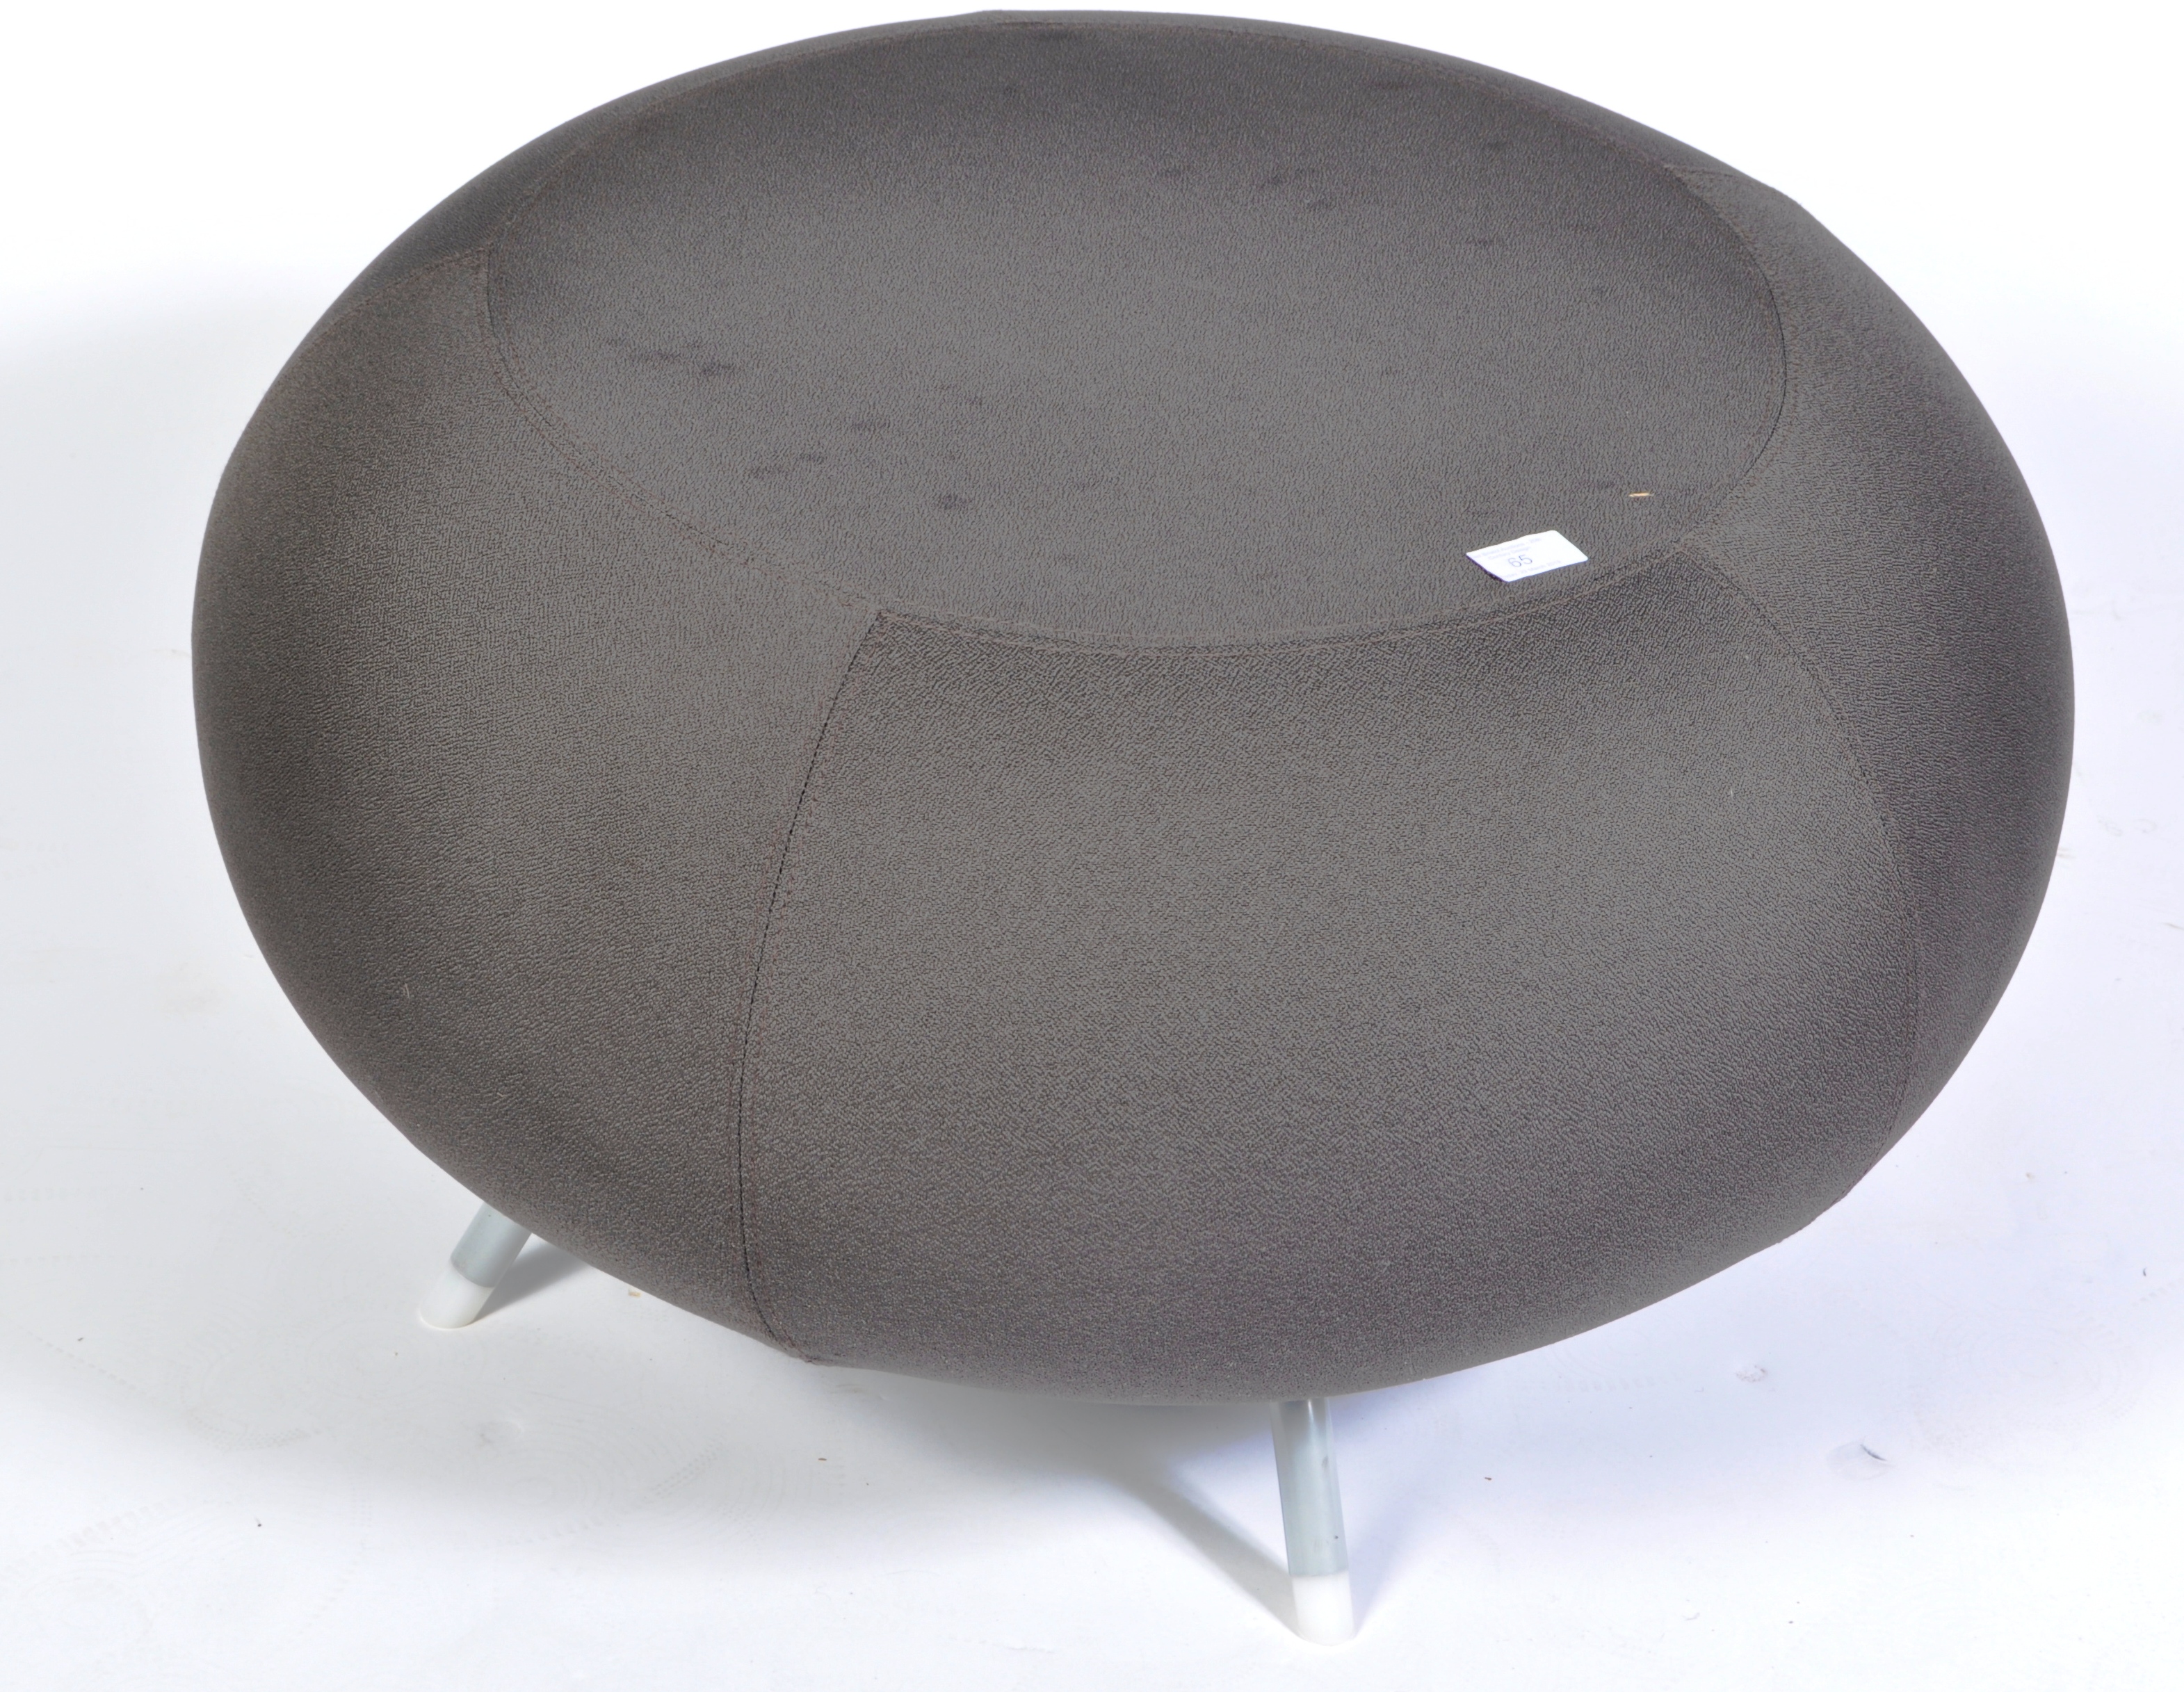 ALLEMUIR A620 MOULDED FOAM PEBBLE CHAIR / STOOL - Image 2 of 3